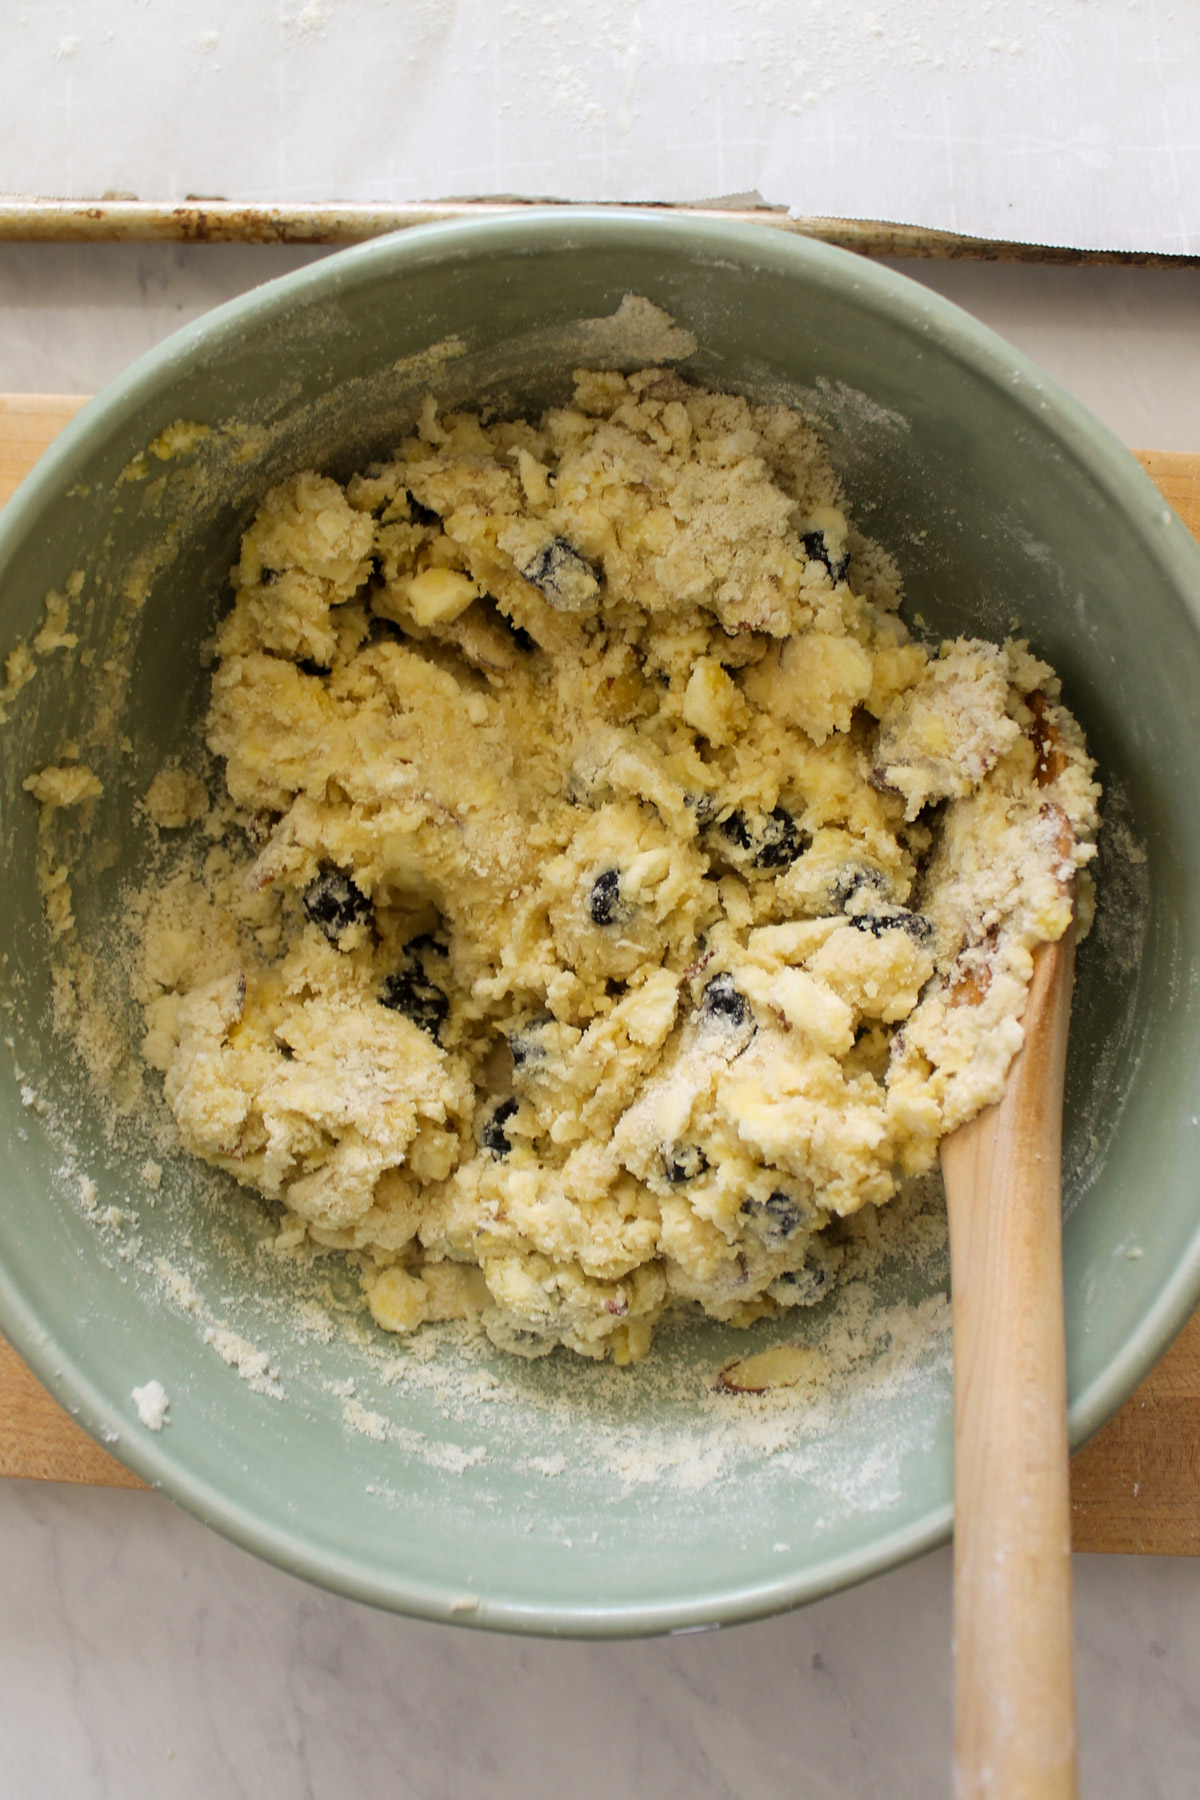 Scone dough being mixed with a wooden spoon in a bowl.